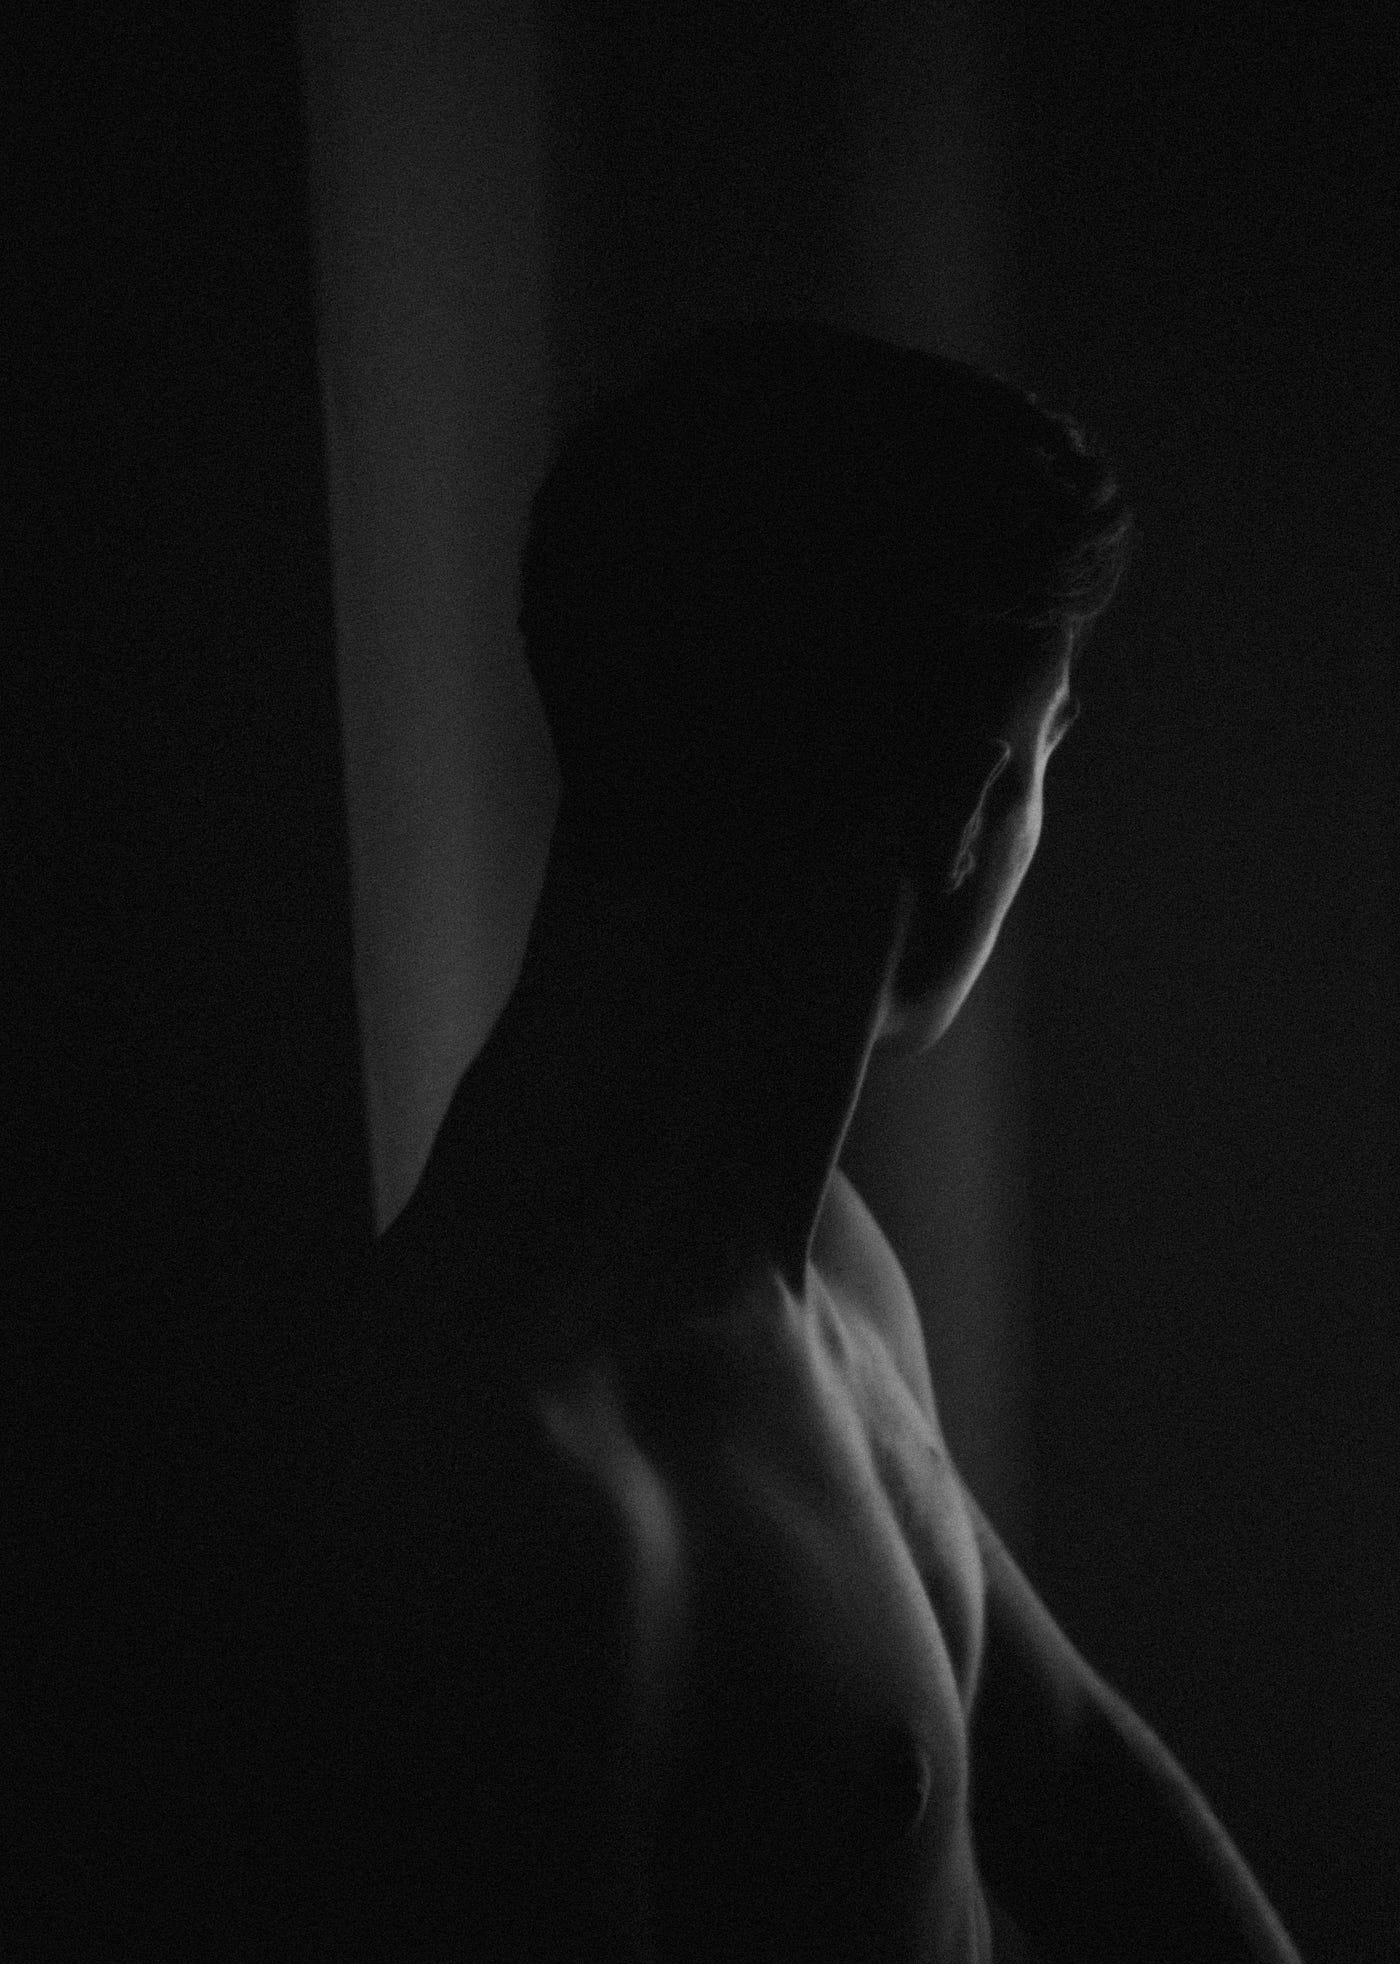 A naked young man is seen in a black and white photo. We see him from chest level up, his head turned away from us. A key the Eroxon® gel advantage is its fast onset. Unlike conventional oral medications (such as Viagra), which may take up to an hour to take effect, the gel starts working within 10 minutes. Moreover, the get is topical, dodging the need for injections or other invasive maneuvers. One rubs the gel onto the penis tip for 15 seconds before sexual intercourse.